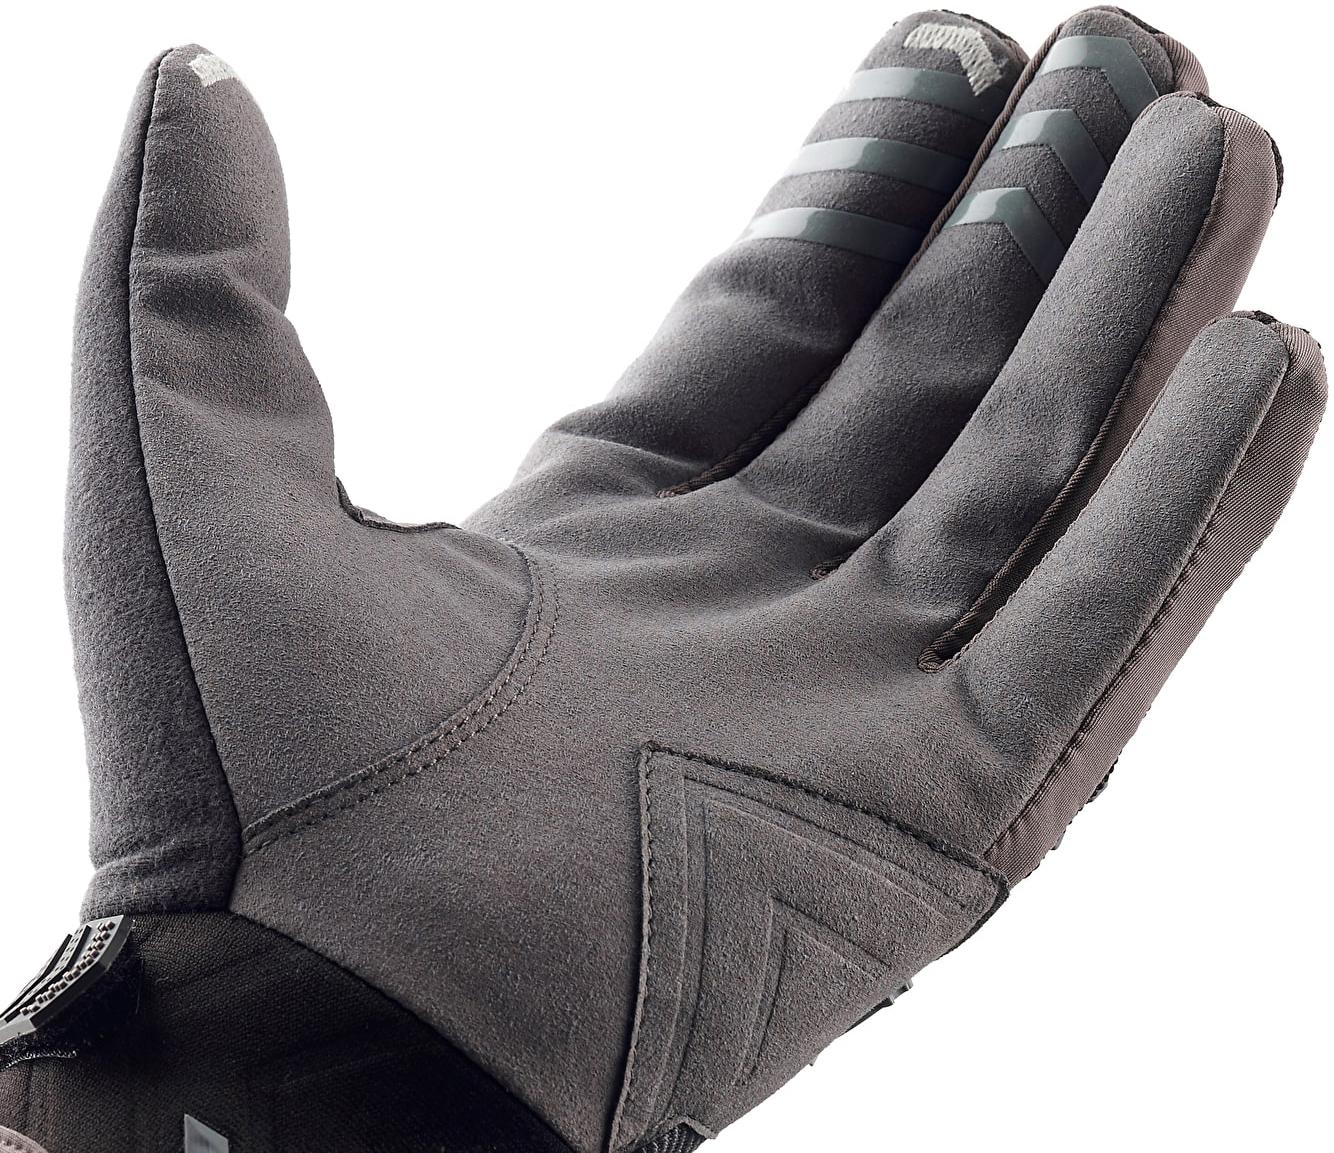 halfords cycling gloves